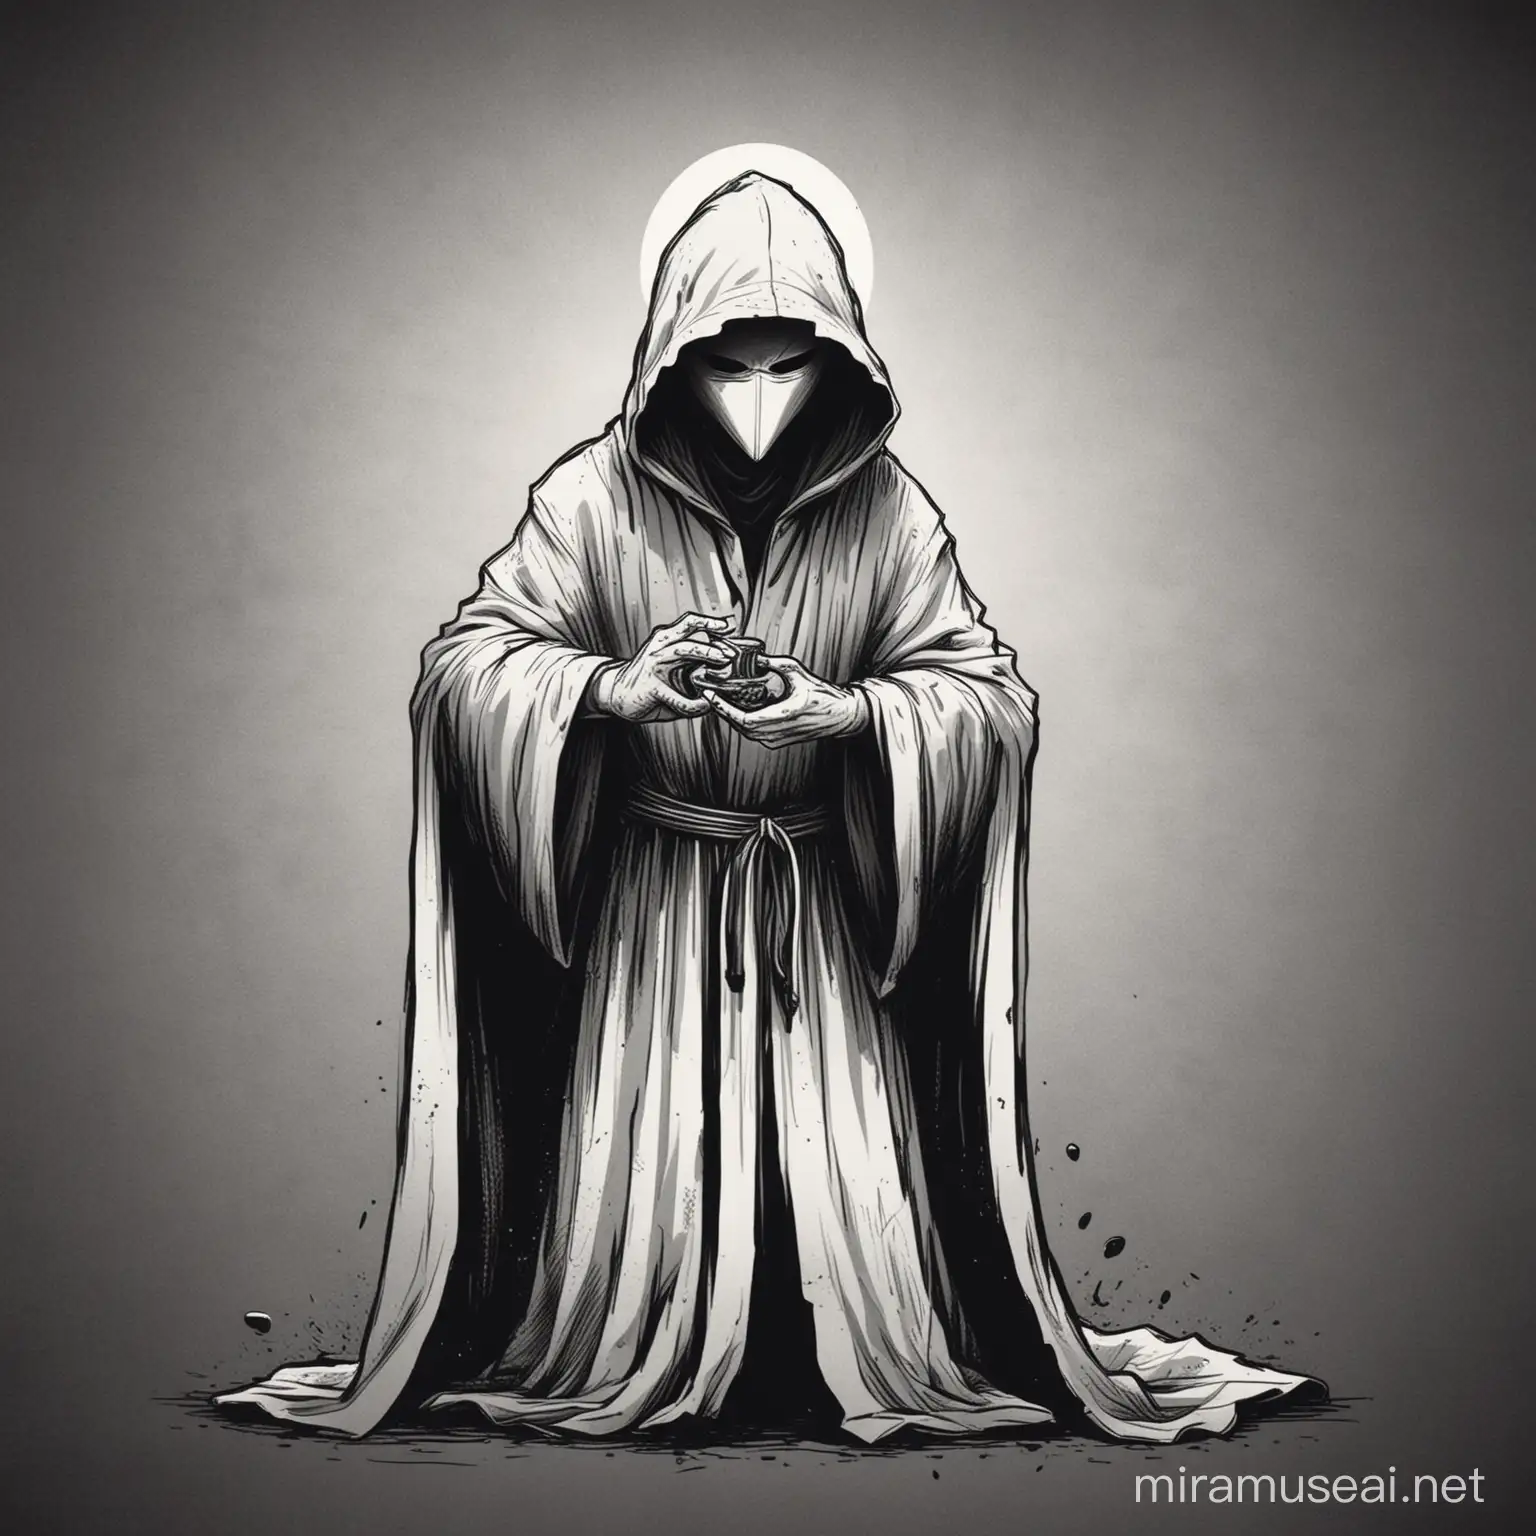 Hooded Cultist Performing Mysterious Ritual in Clean Lines Black and White Cartoon Drawing